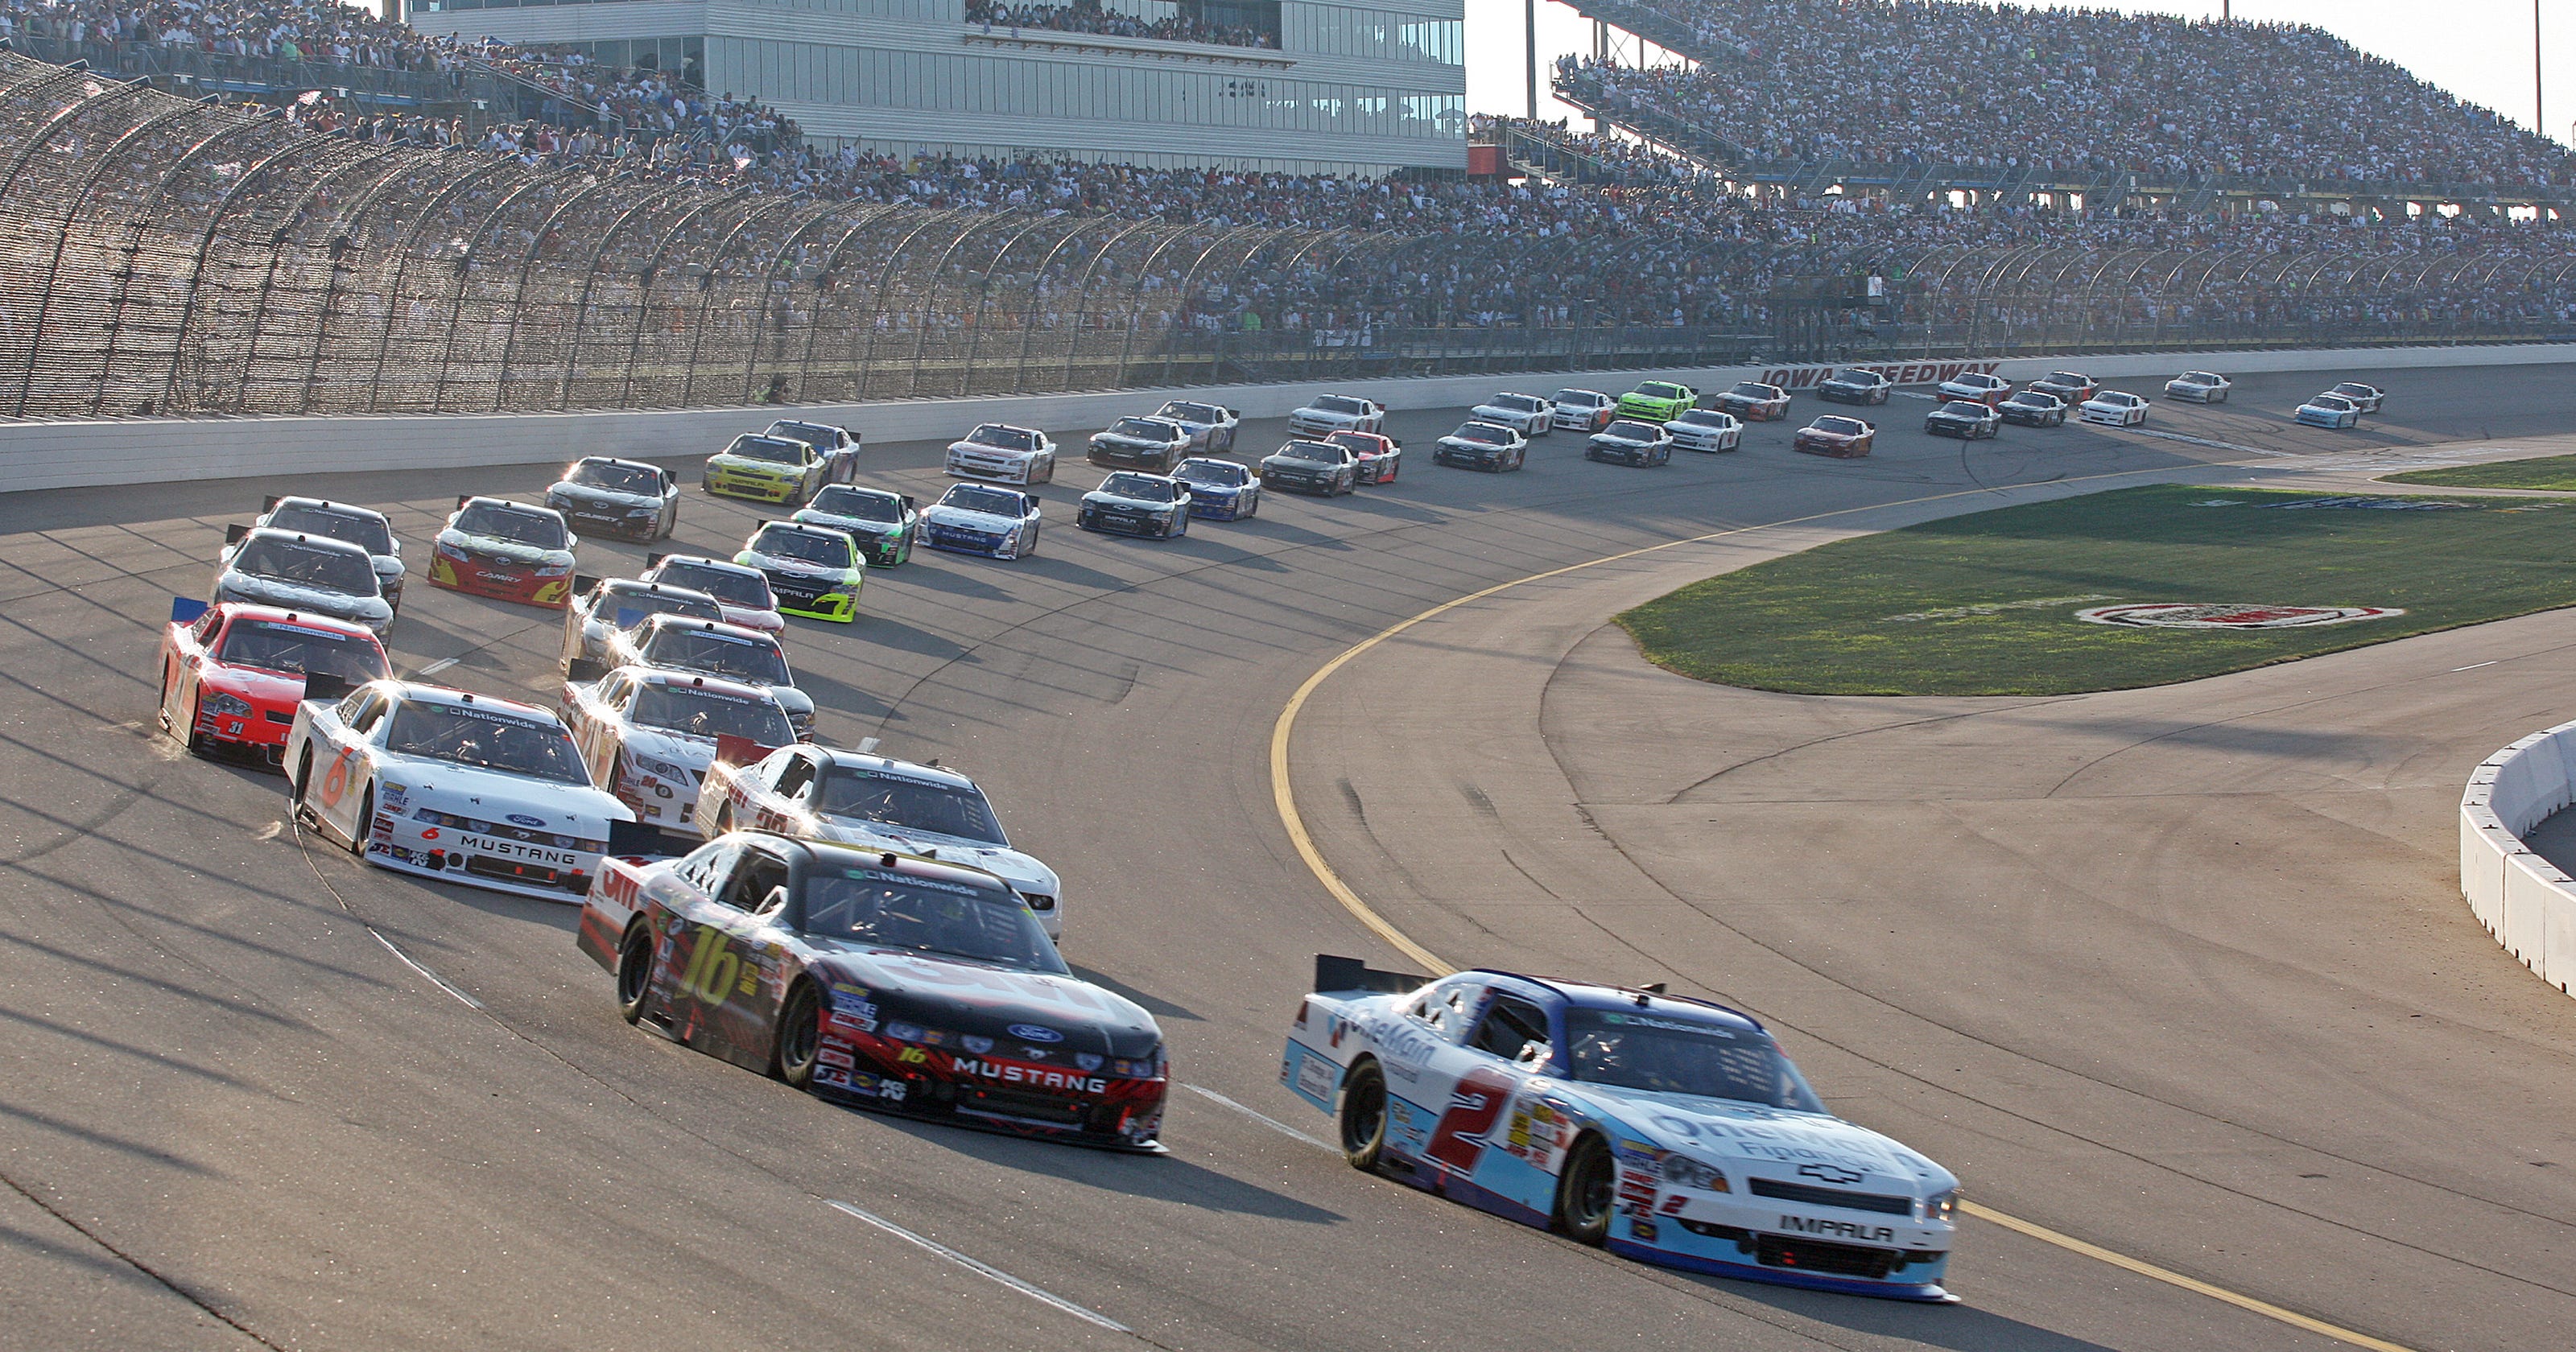 Iowa Speedway has best chance 'ever' to land NASCAR Cup Series race